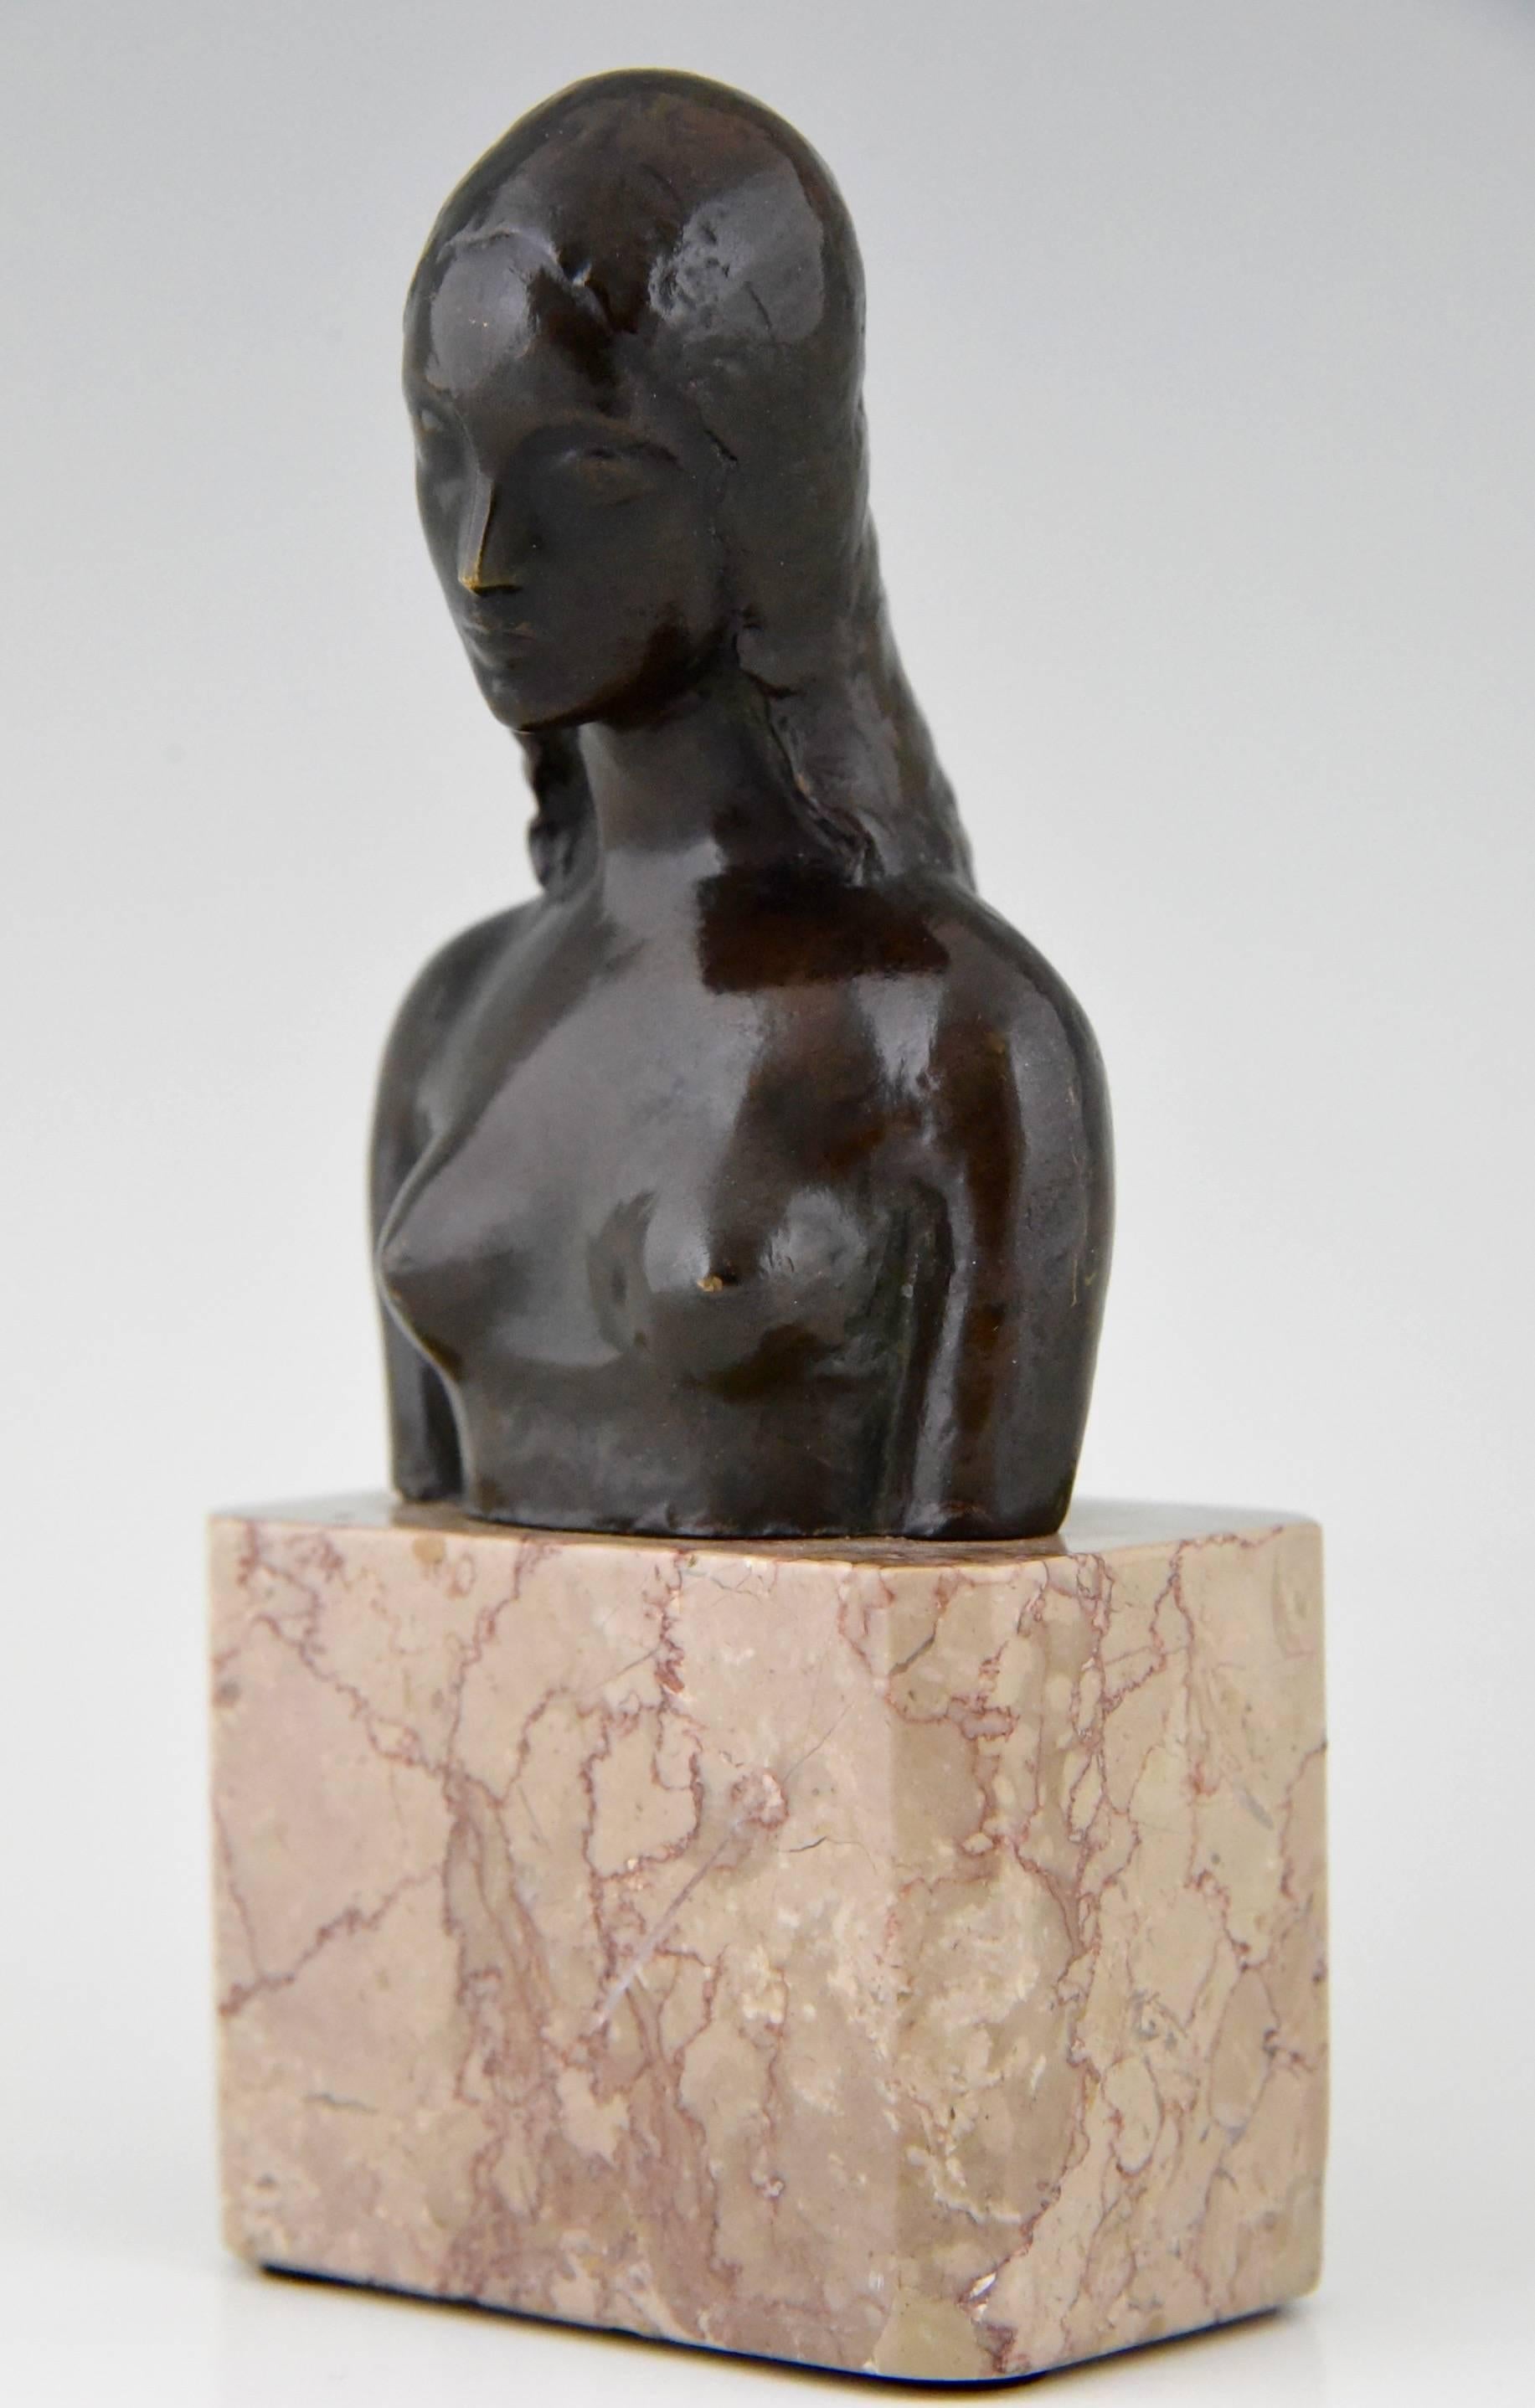 20th Century American Art Deco Bronze Bust of a Female Nude by Simon Moselsio 1930